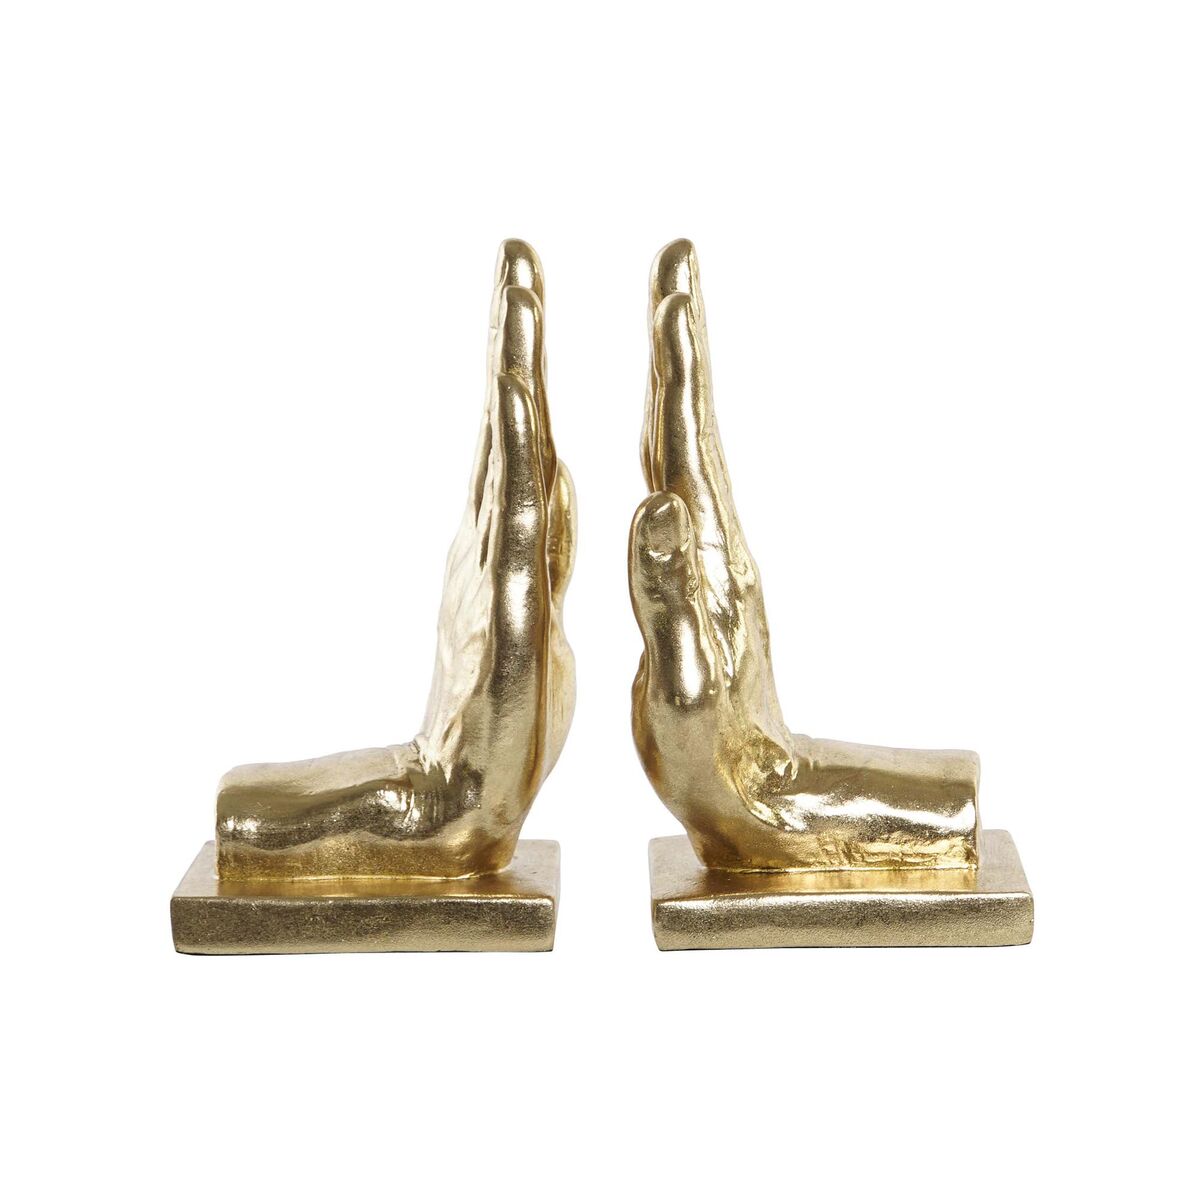 Bookend DKD Home Decor 2 Pieces Resin Modern (24 x 10 x 22 cm)